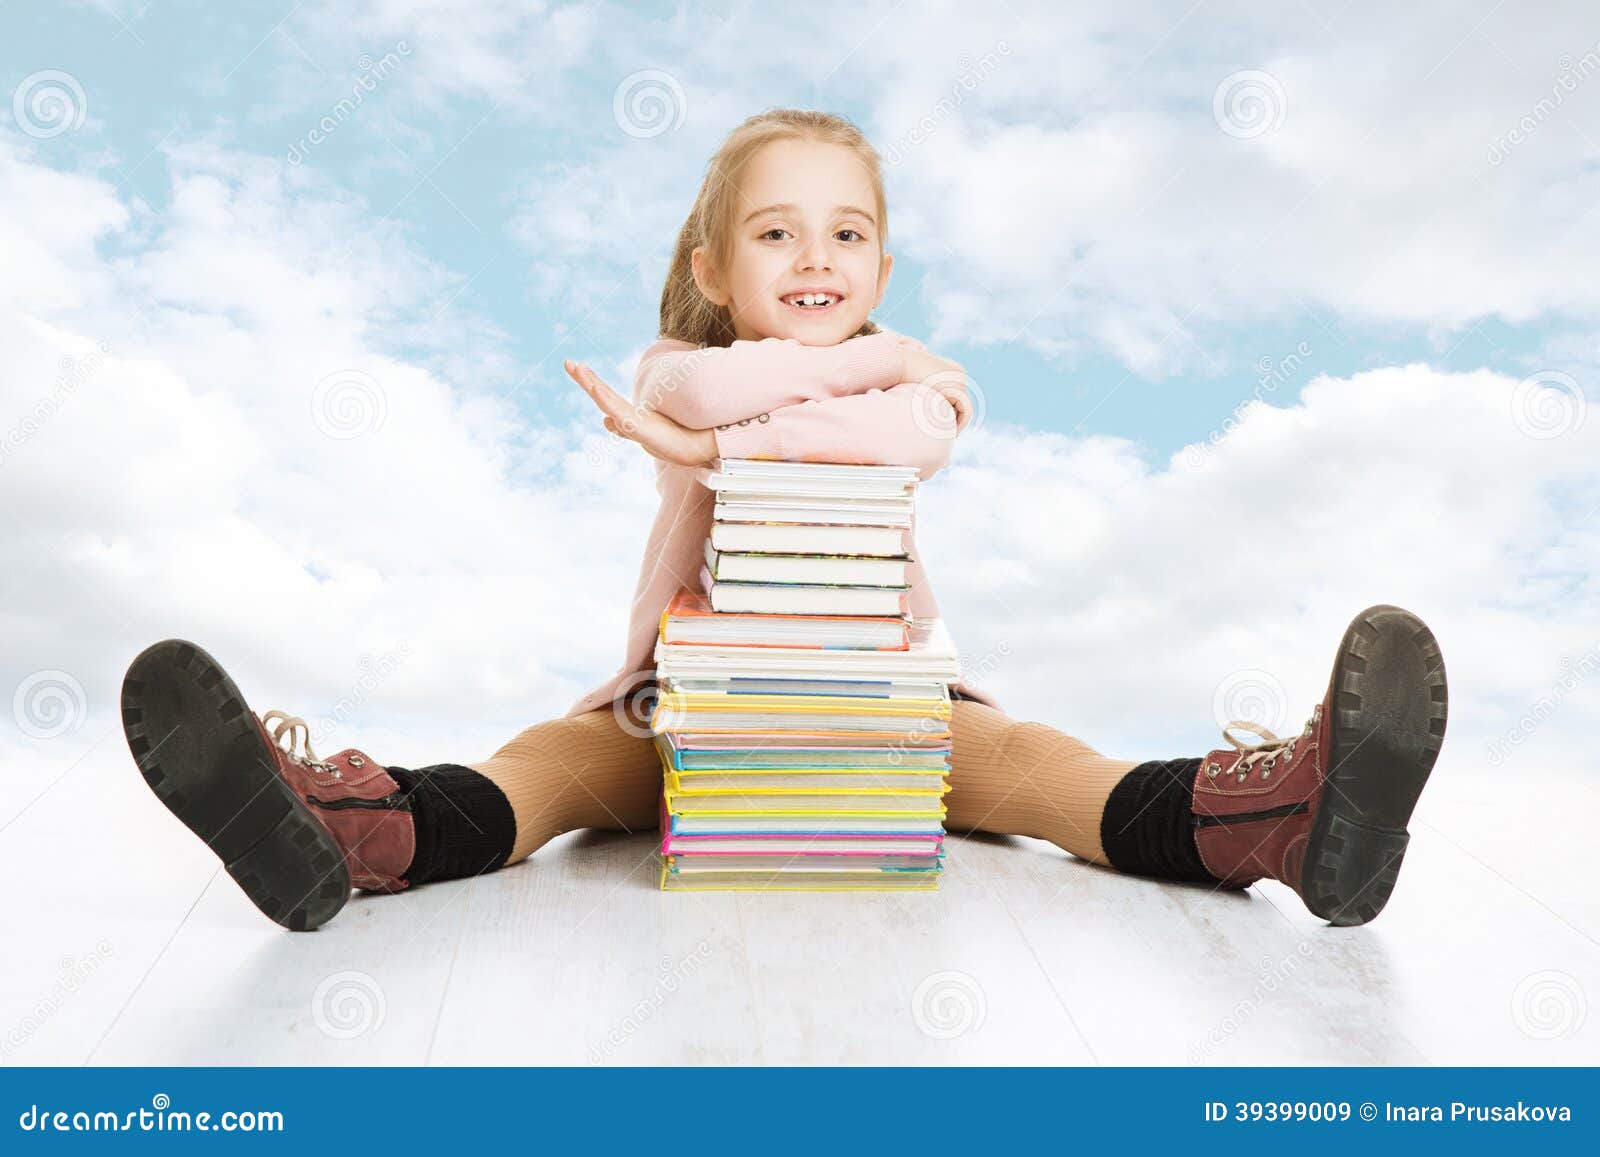 School Girl And Books Stack. Smiling Happy Child Pupil Stock Photo - Image: 39399009